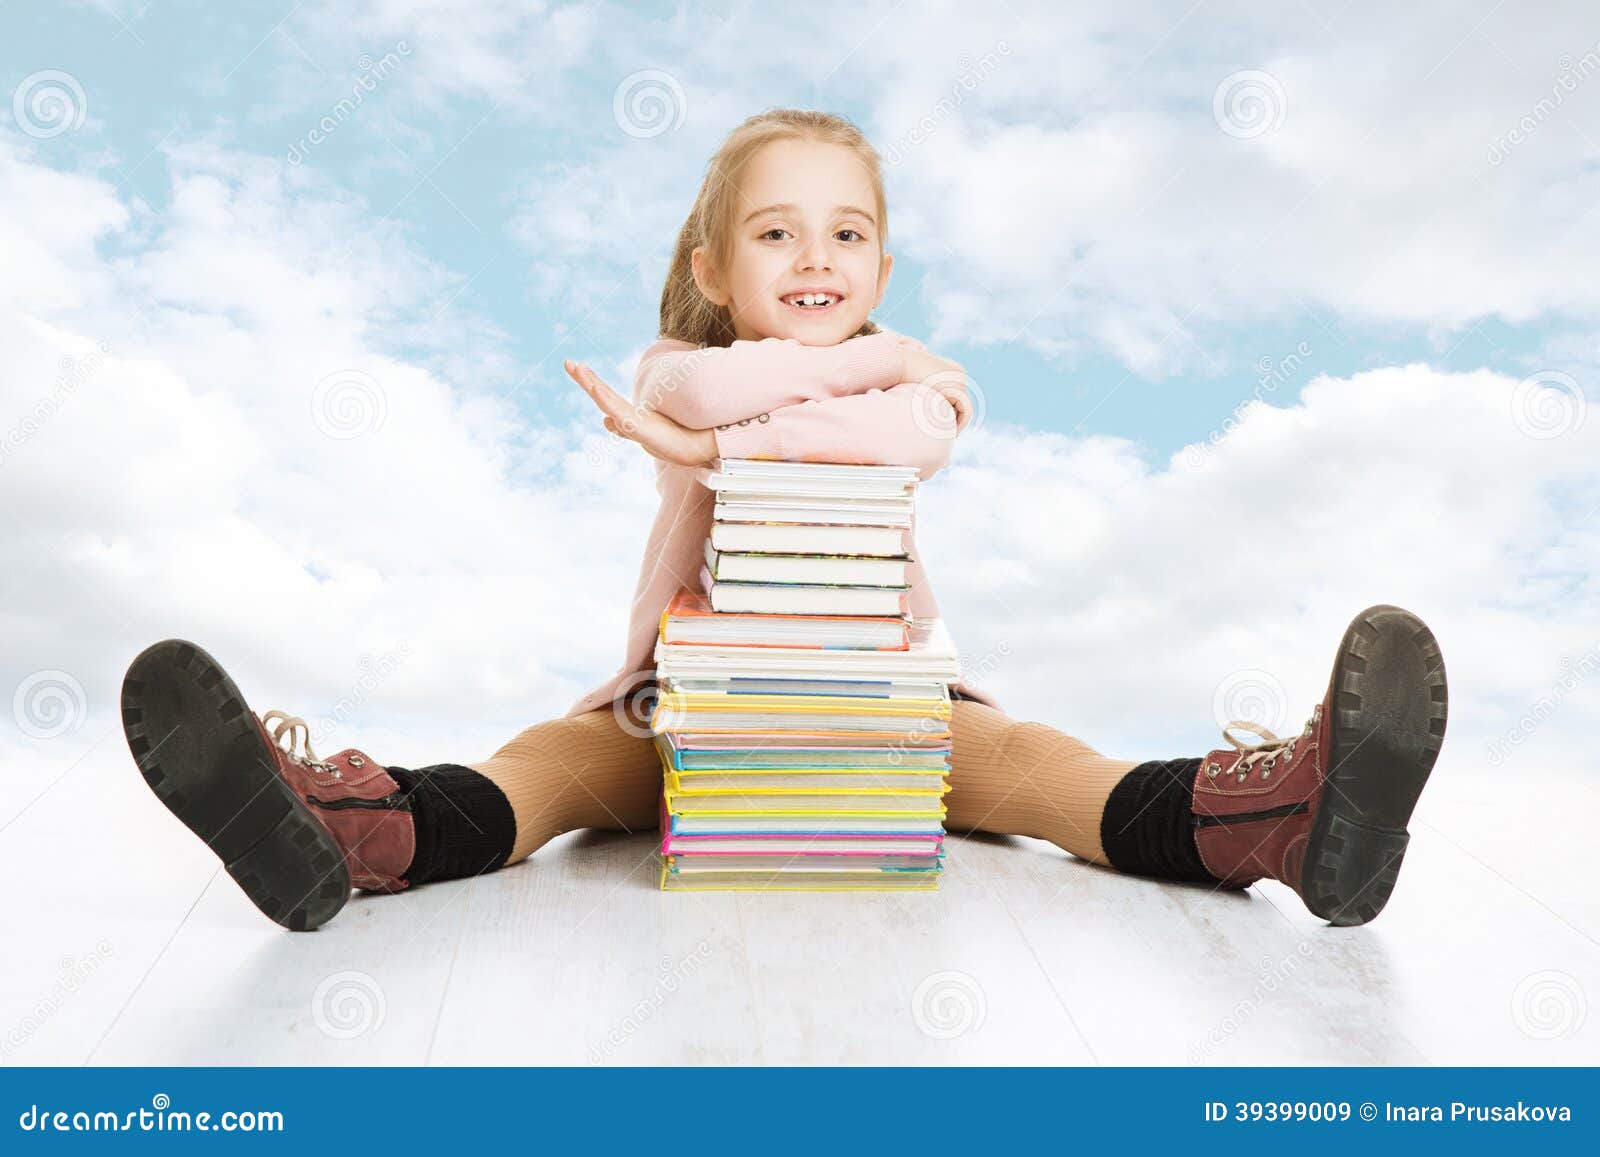 School Girl And Books Stack. Smiling Happy Child Pupil Stock Photo - Image: 39399009